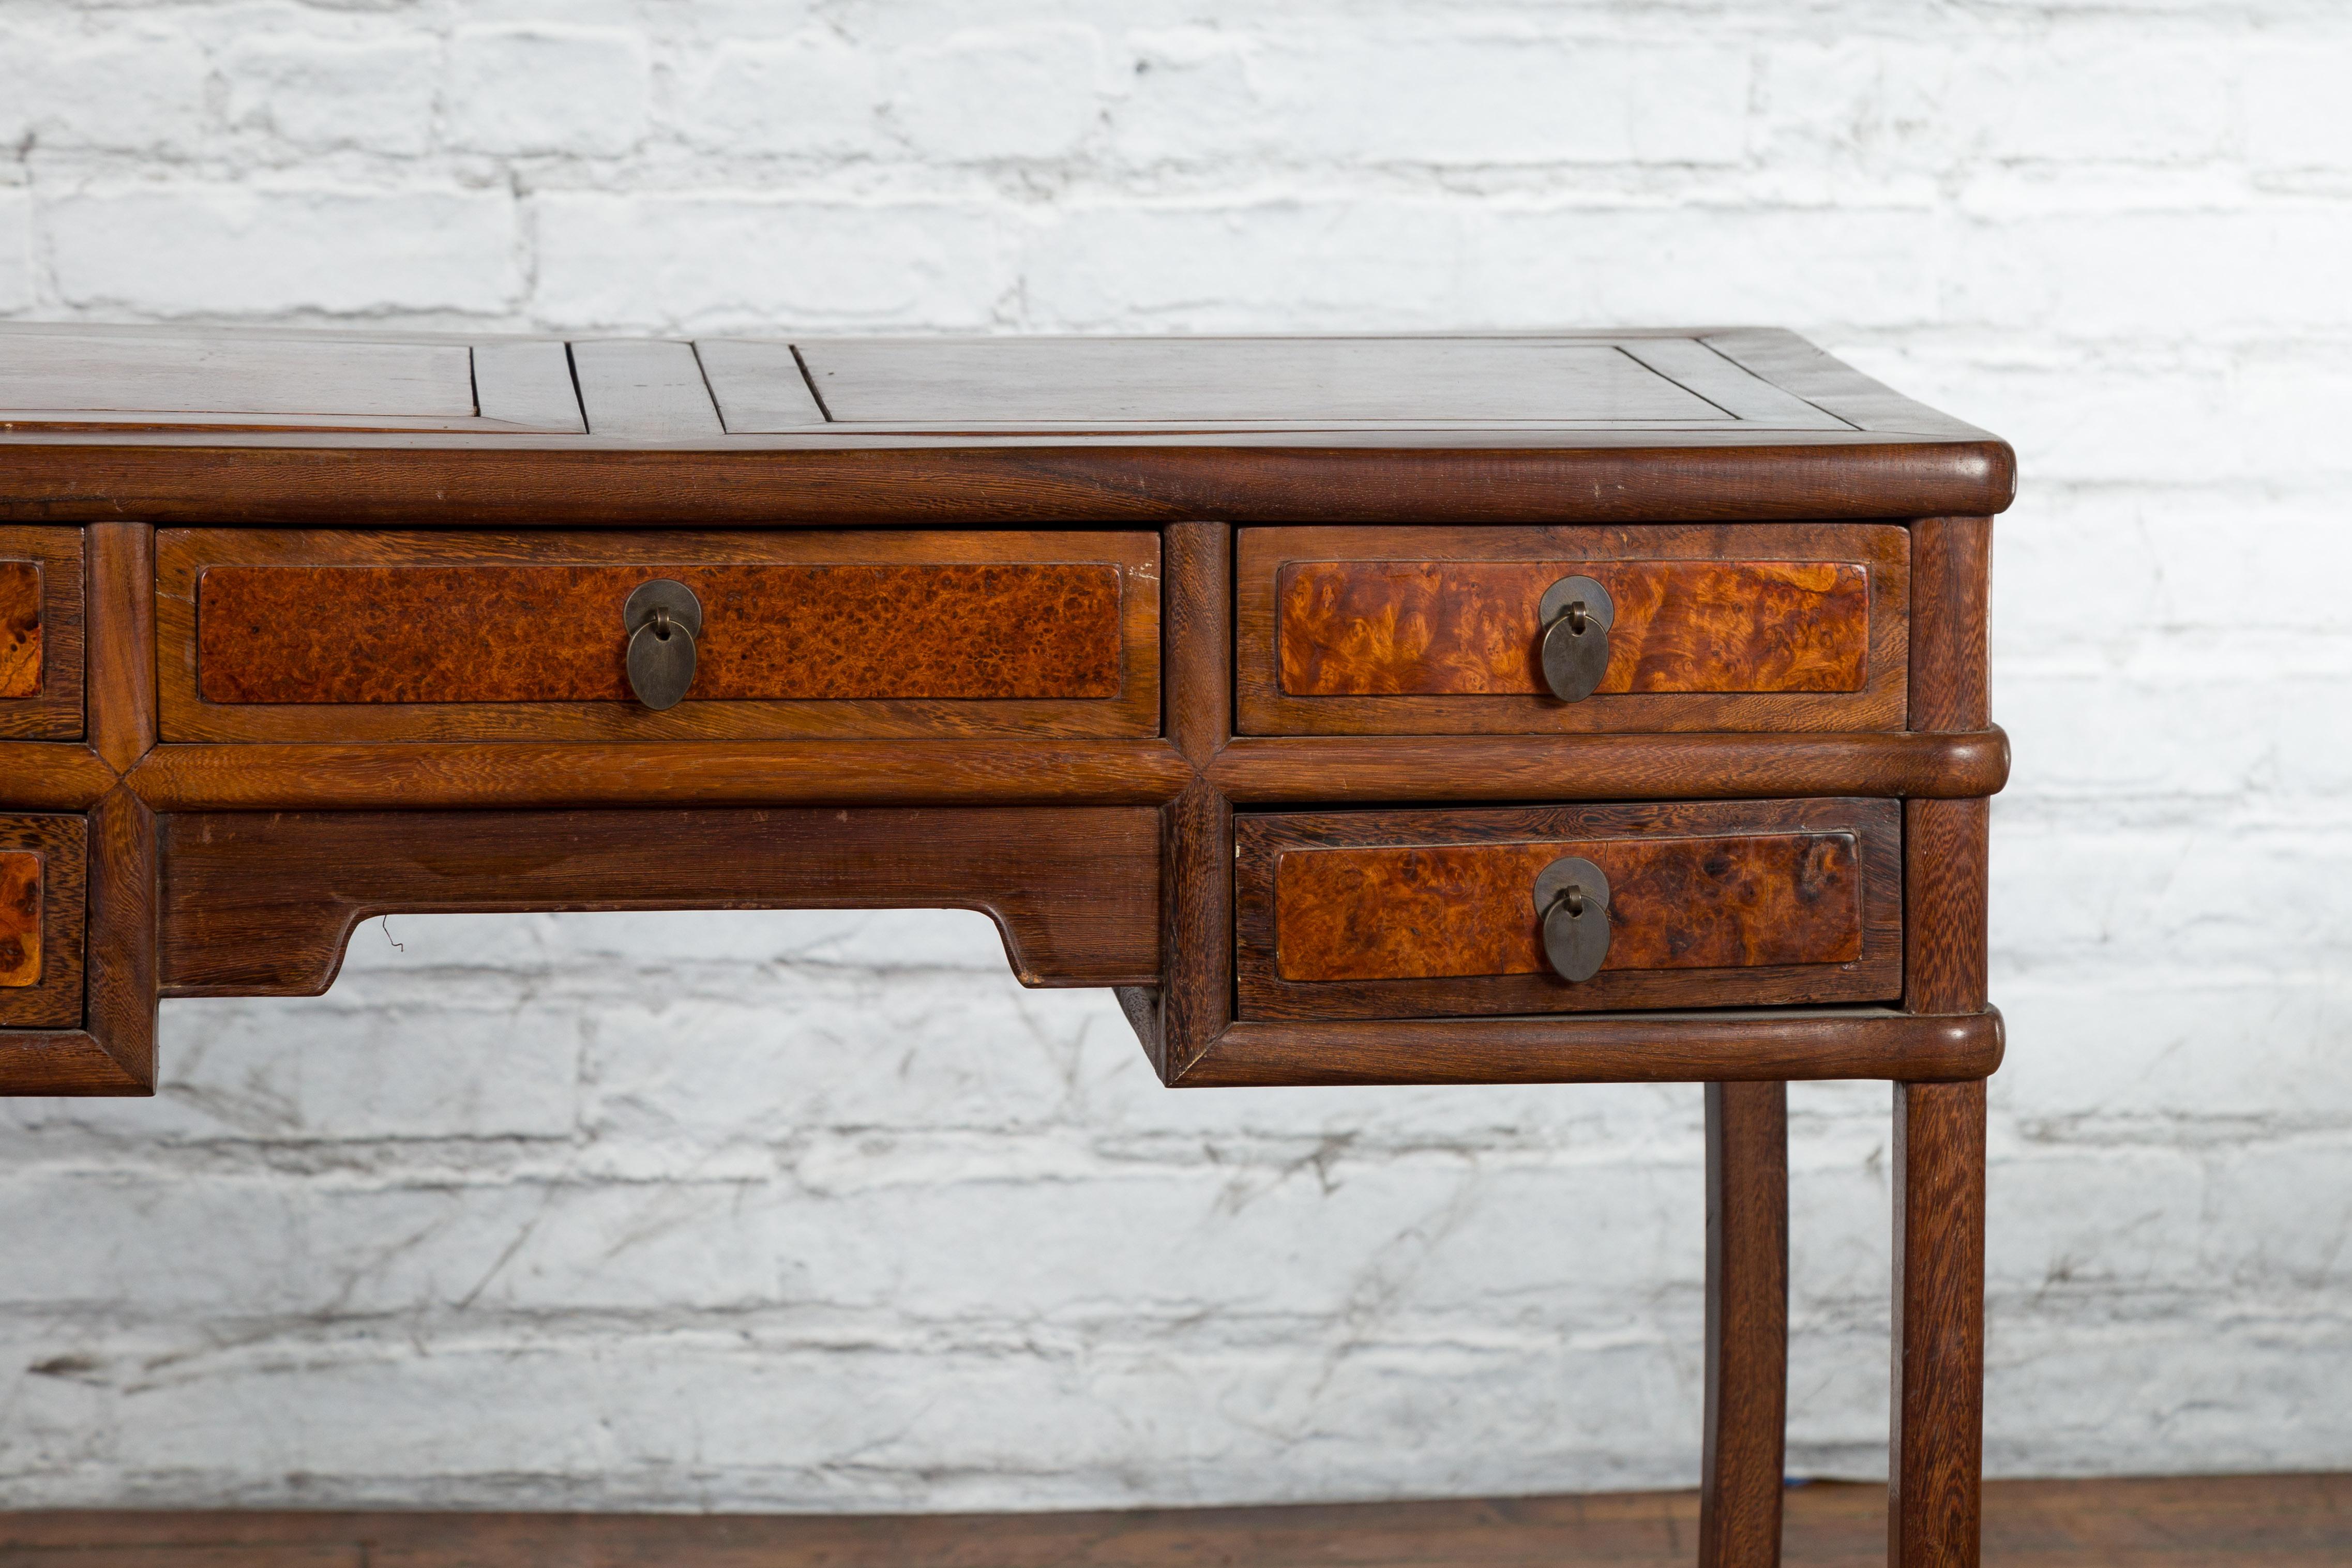 Wood Qing Dynasty 19th Century Desk with Burlwood Top, Drawers and Cracked Ice Shelf For Sale